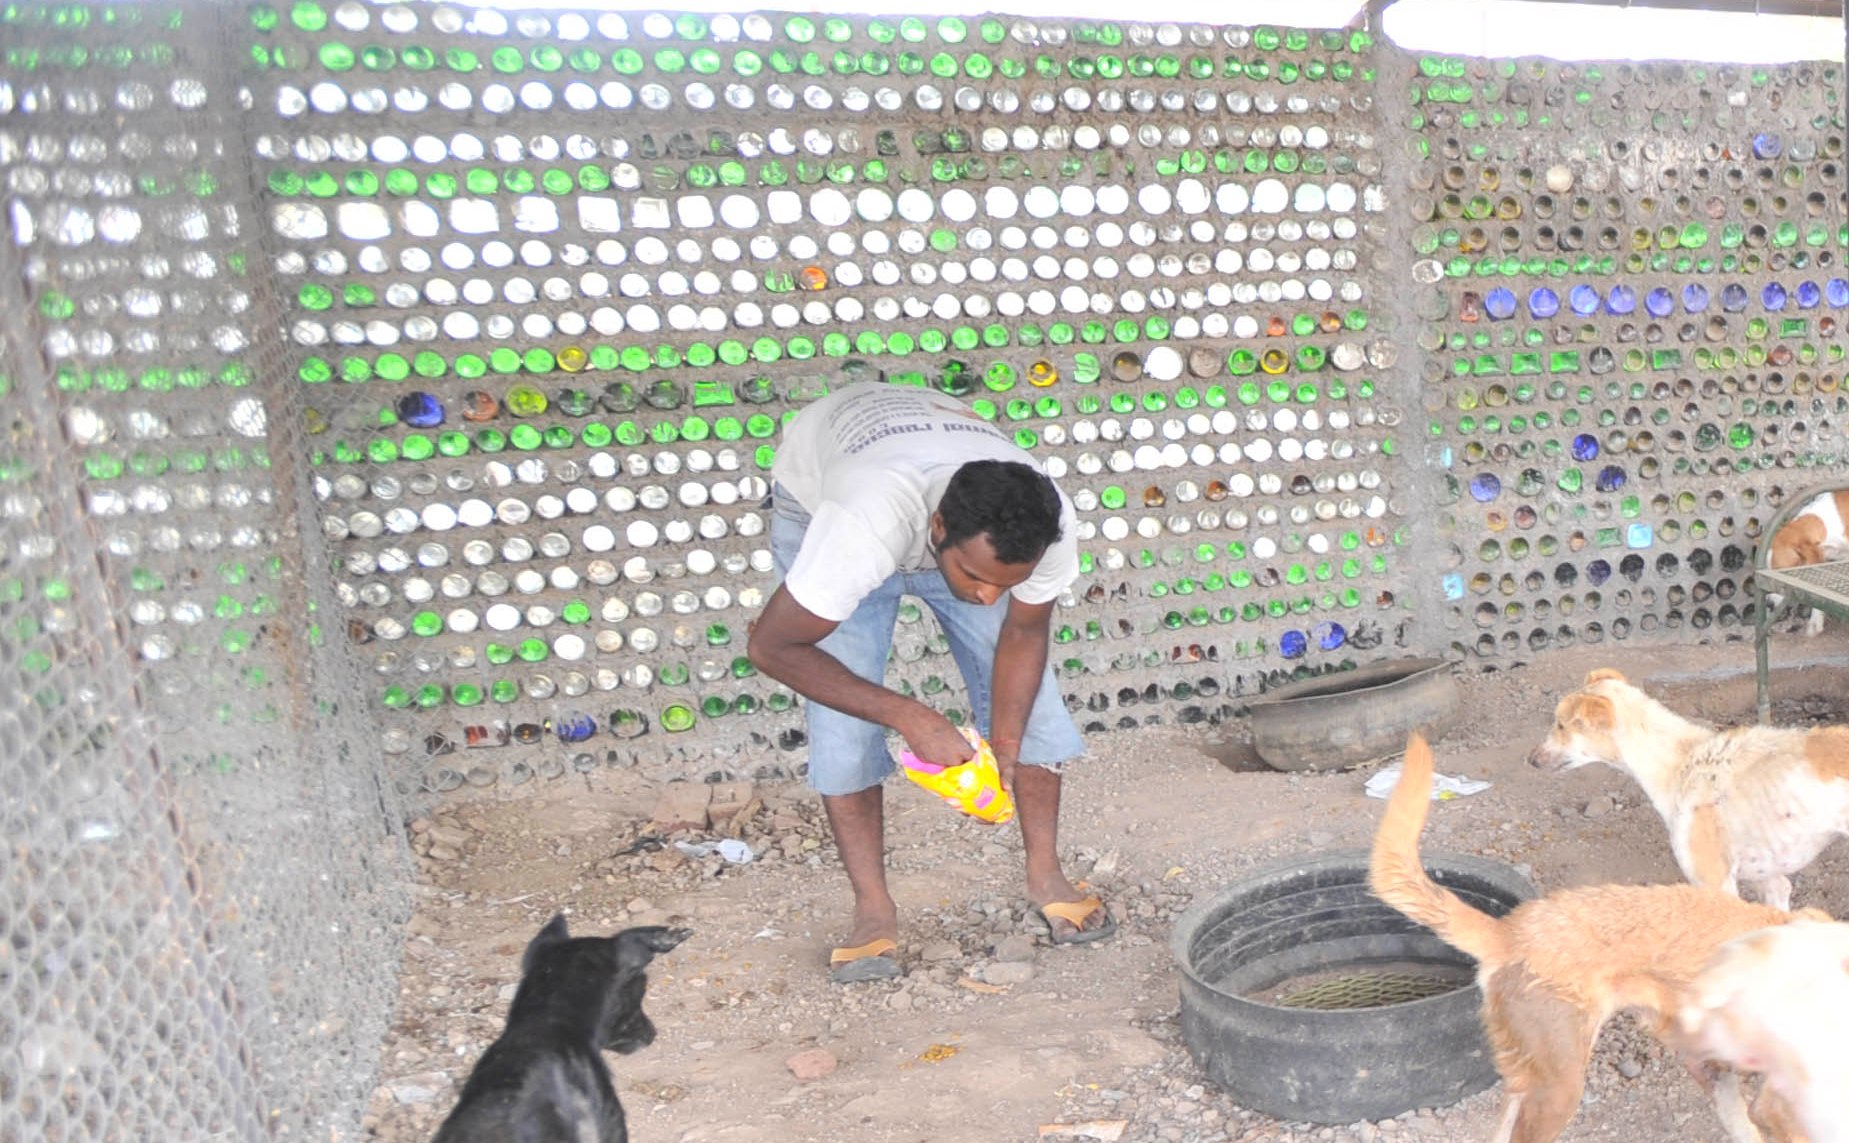 How this animal shelter in Pune was built using plastic bottles